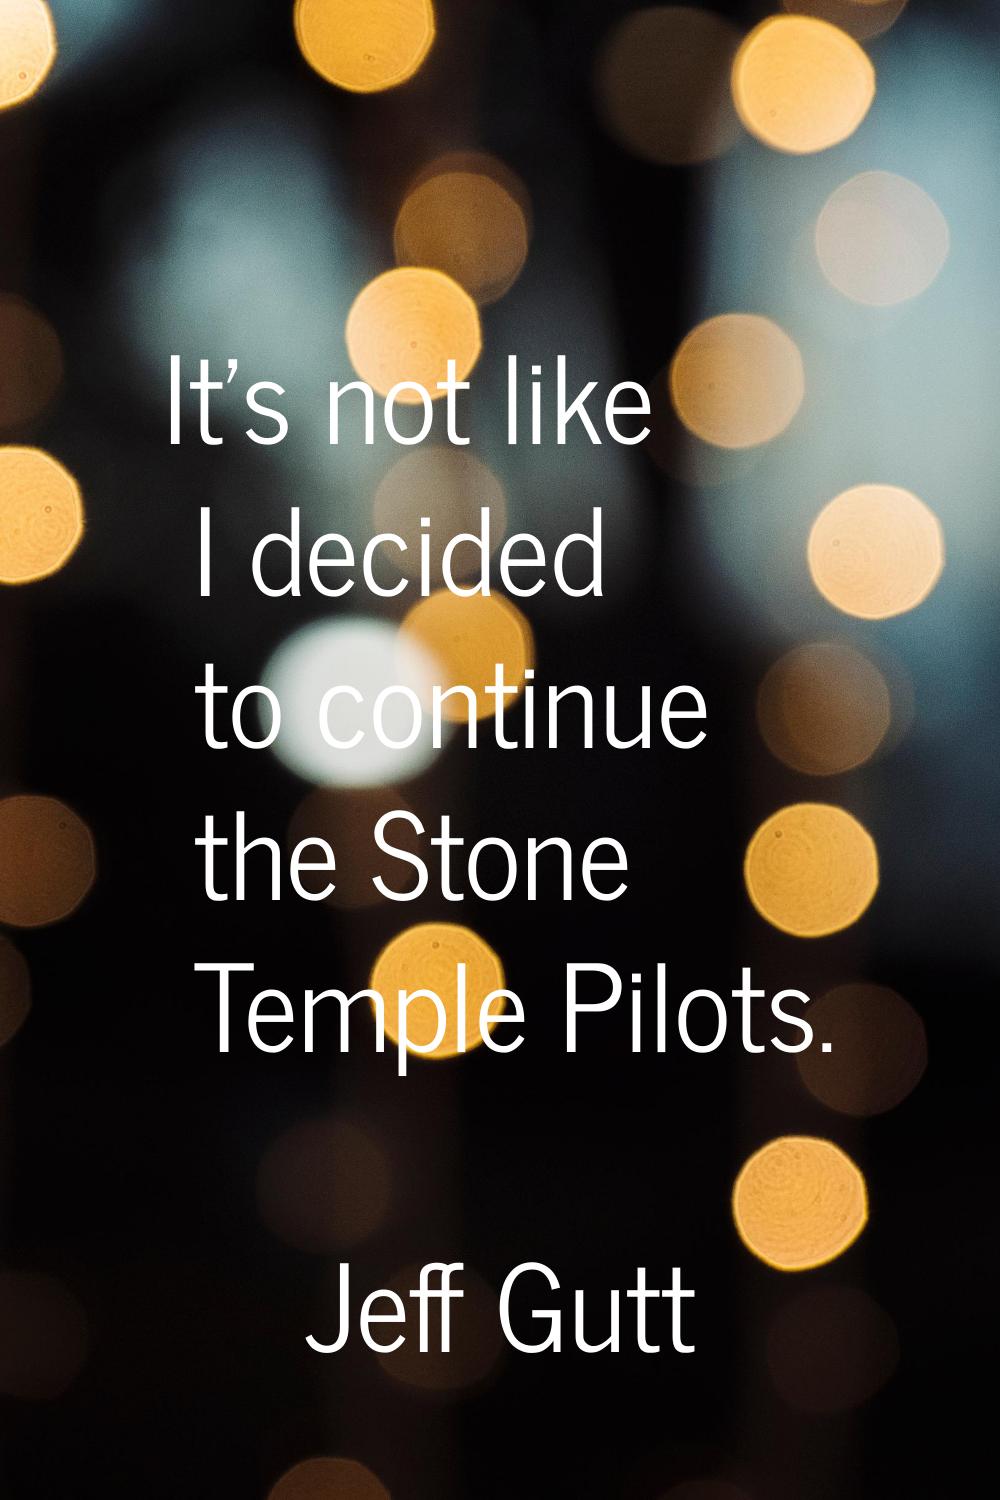 It's not like I decided to continue the Stone Temple Pilots.